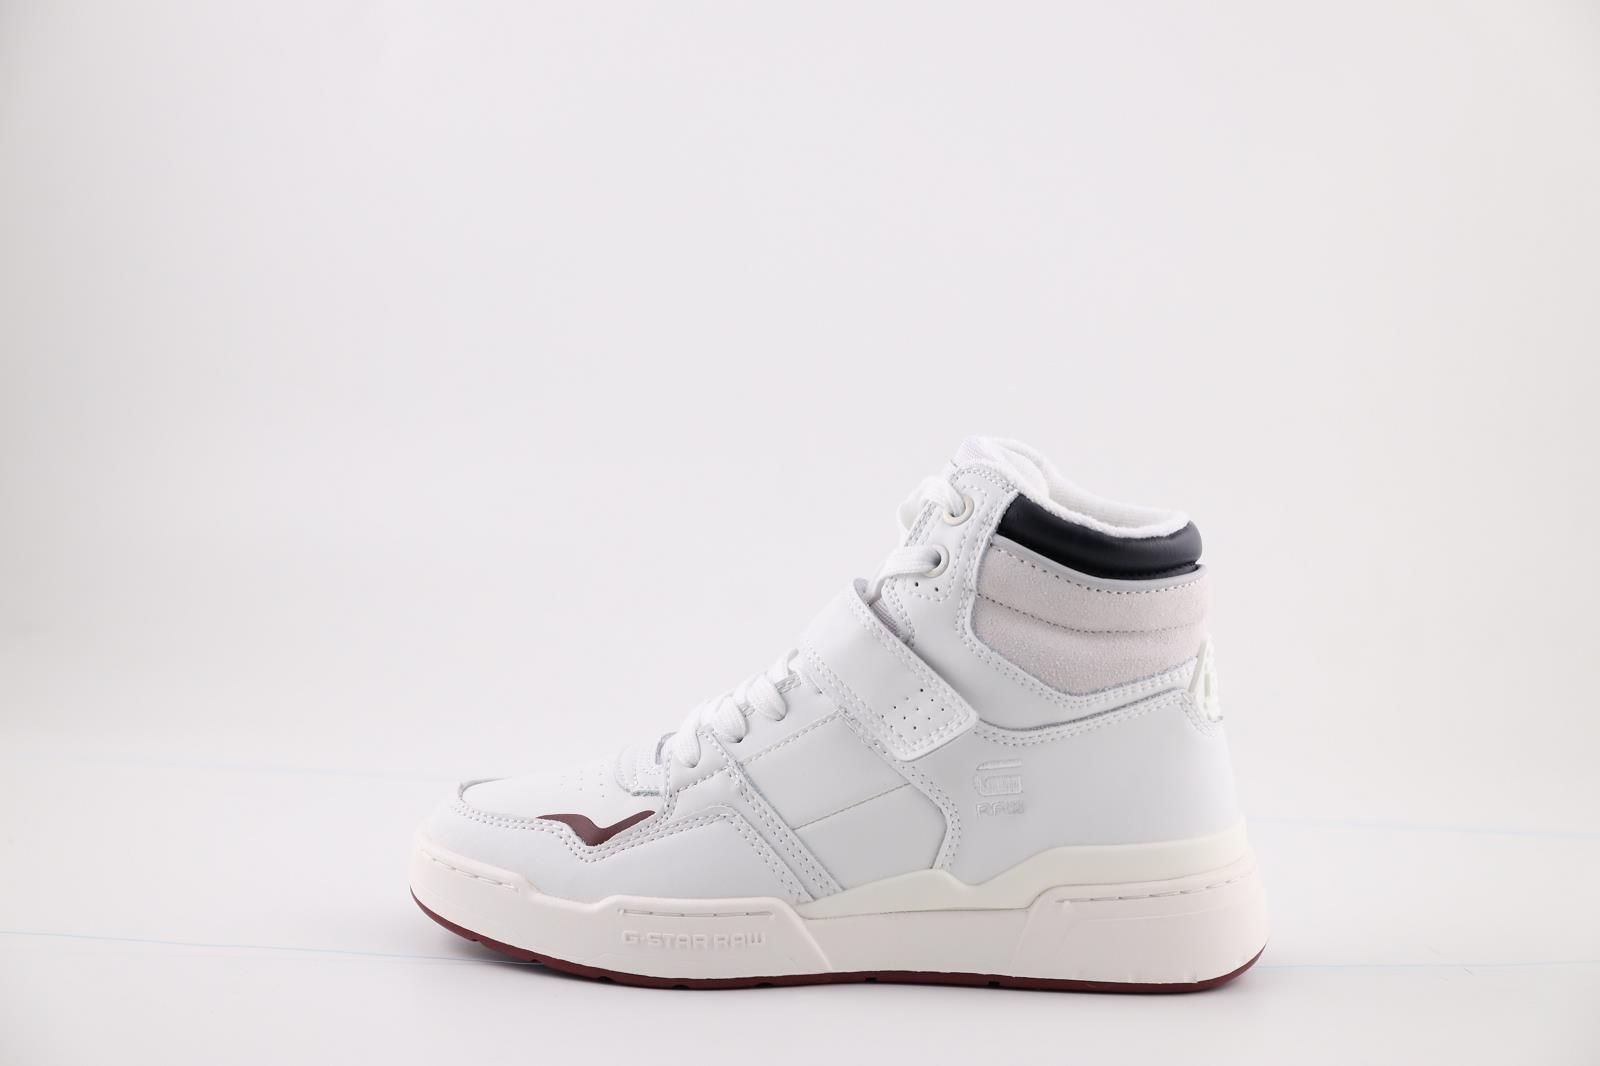 G-STAR RAW Sneackers Blanc dames (Attacc - 2211/040708/1000) - Marques à Suivre